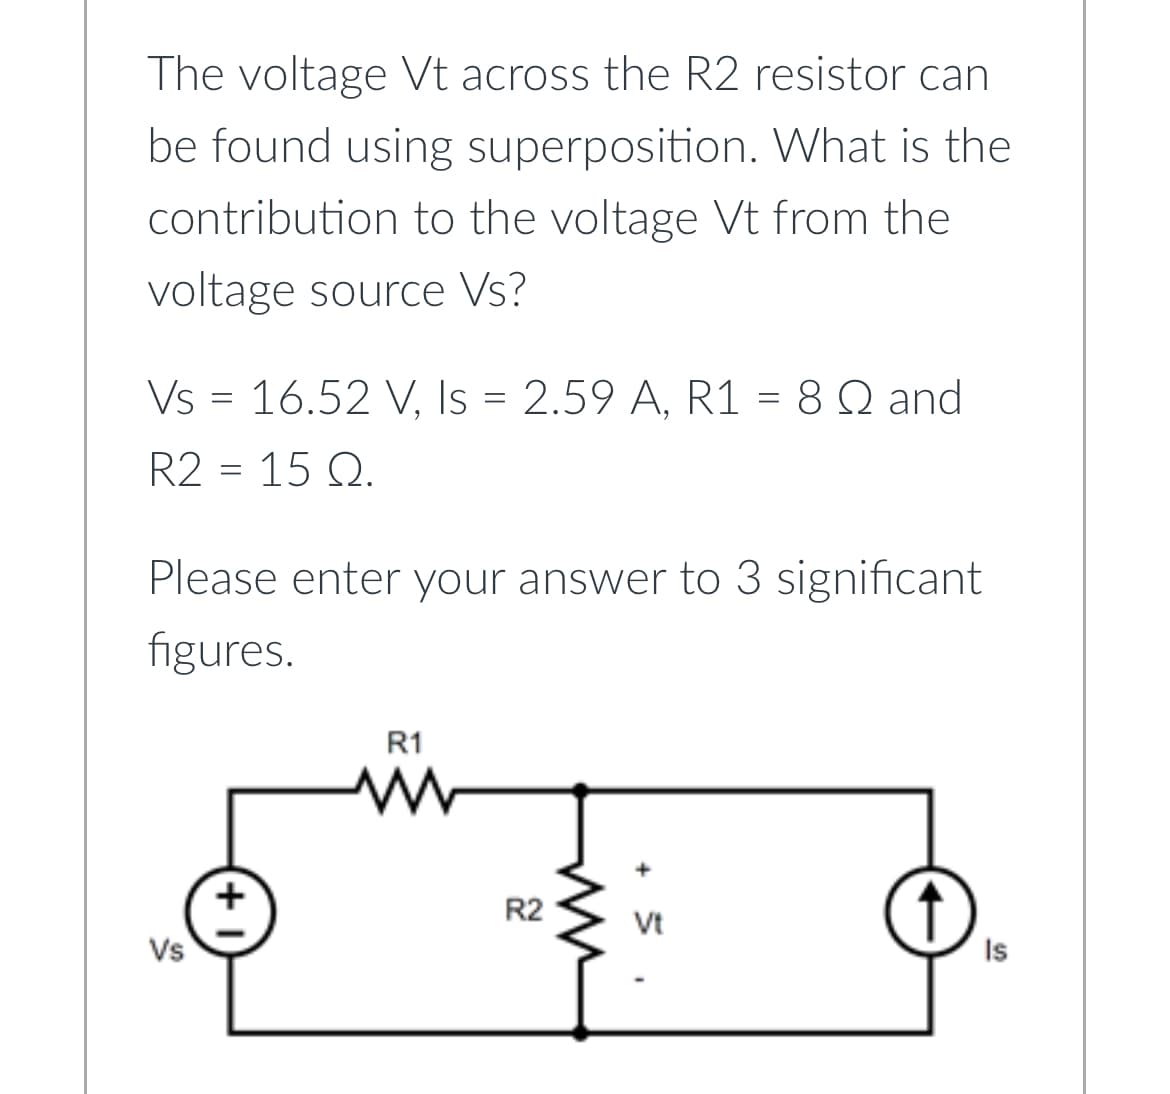 The voltage Vt across the R2 resistor can
be found using superposition. What is the
contribution to the voltage Vt from the
voltage source Vs?
Vs = 16.52 V, Is = 2.59 A, R1 = 8 Q and
R2 = 15 Q.
Please enter your answer to 3 significant
figures.
Vs
+1
R1
www
R2
ww
Vt
Is